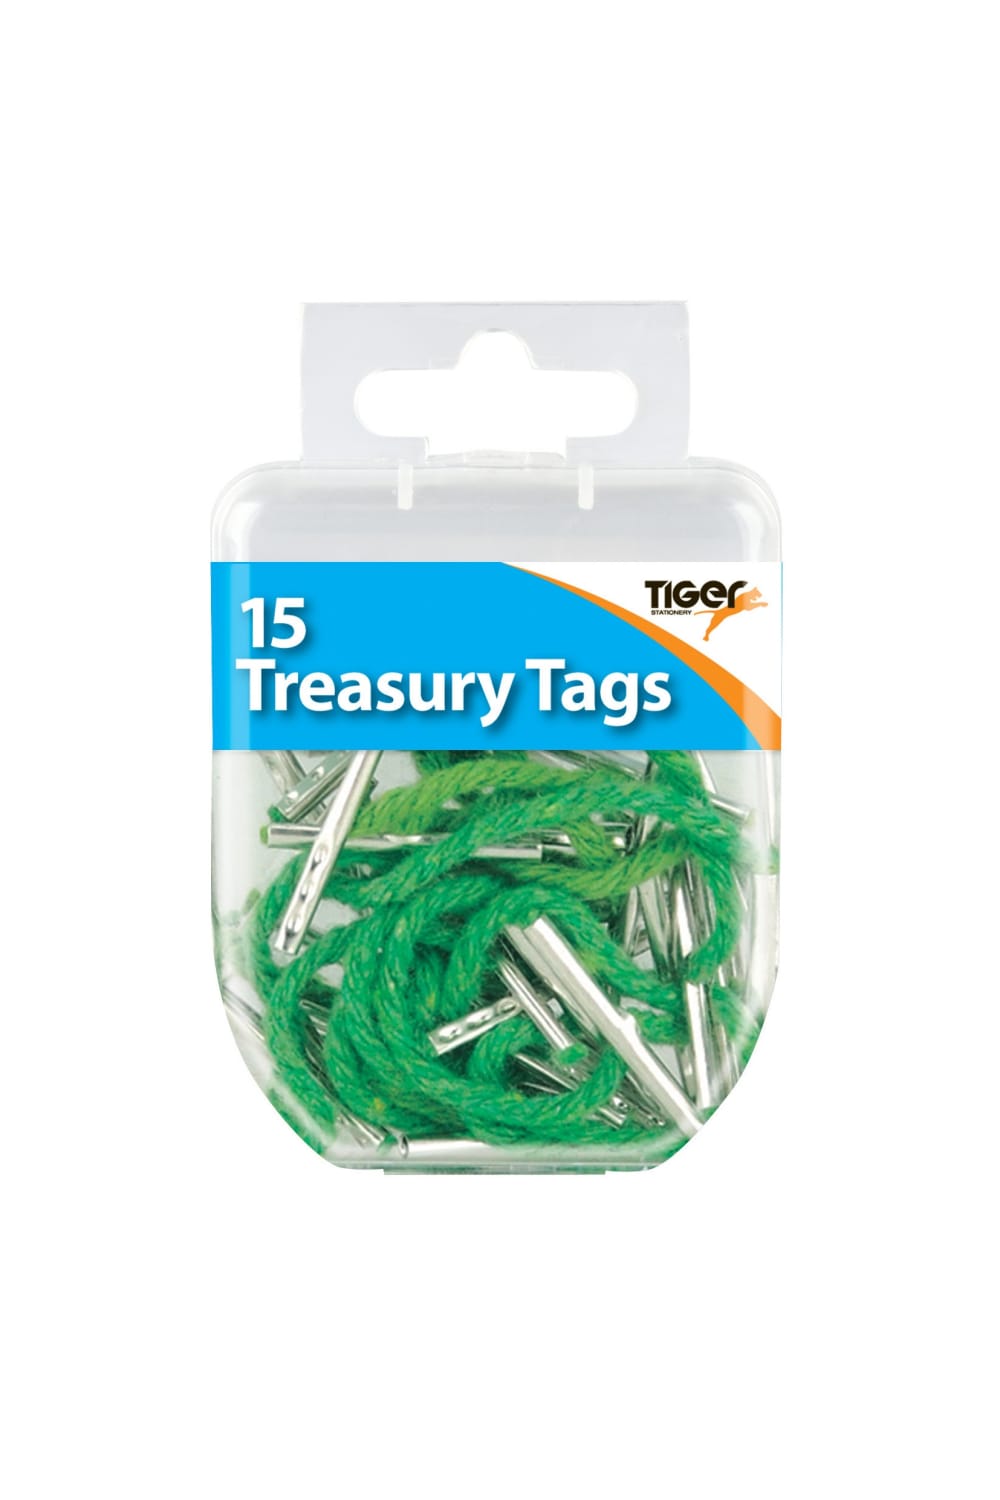 Tiger Stationery Treasury Tags (Pack of 15) (Green/Silver) (One Size)